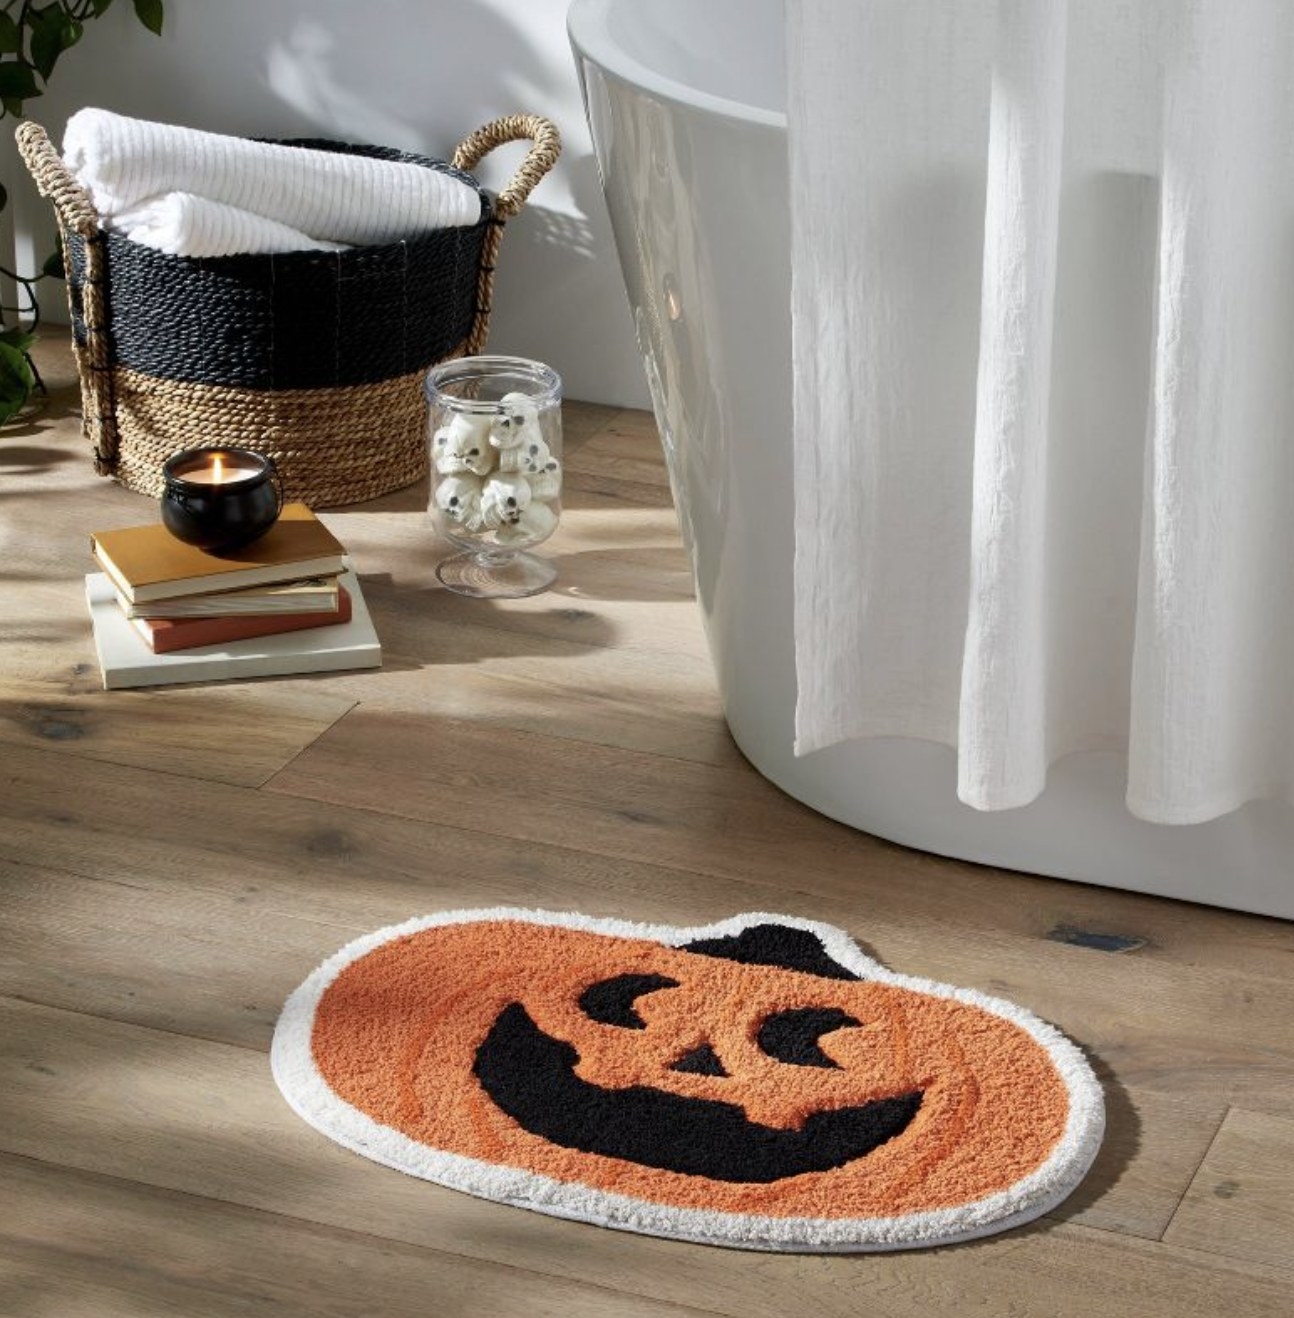 The pumpkin bath rug in front of shower